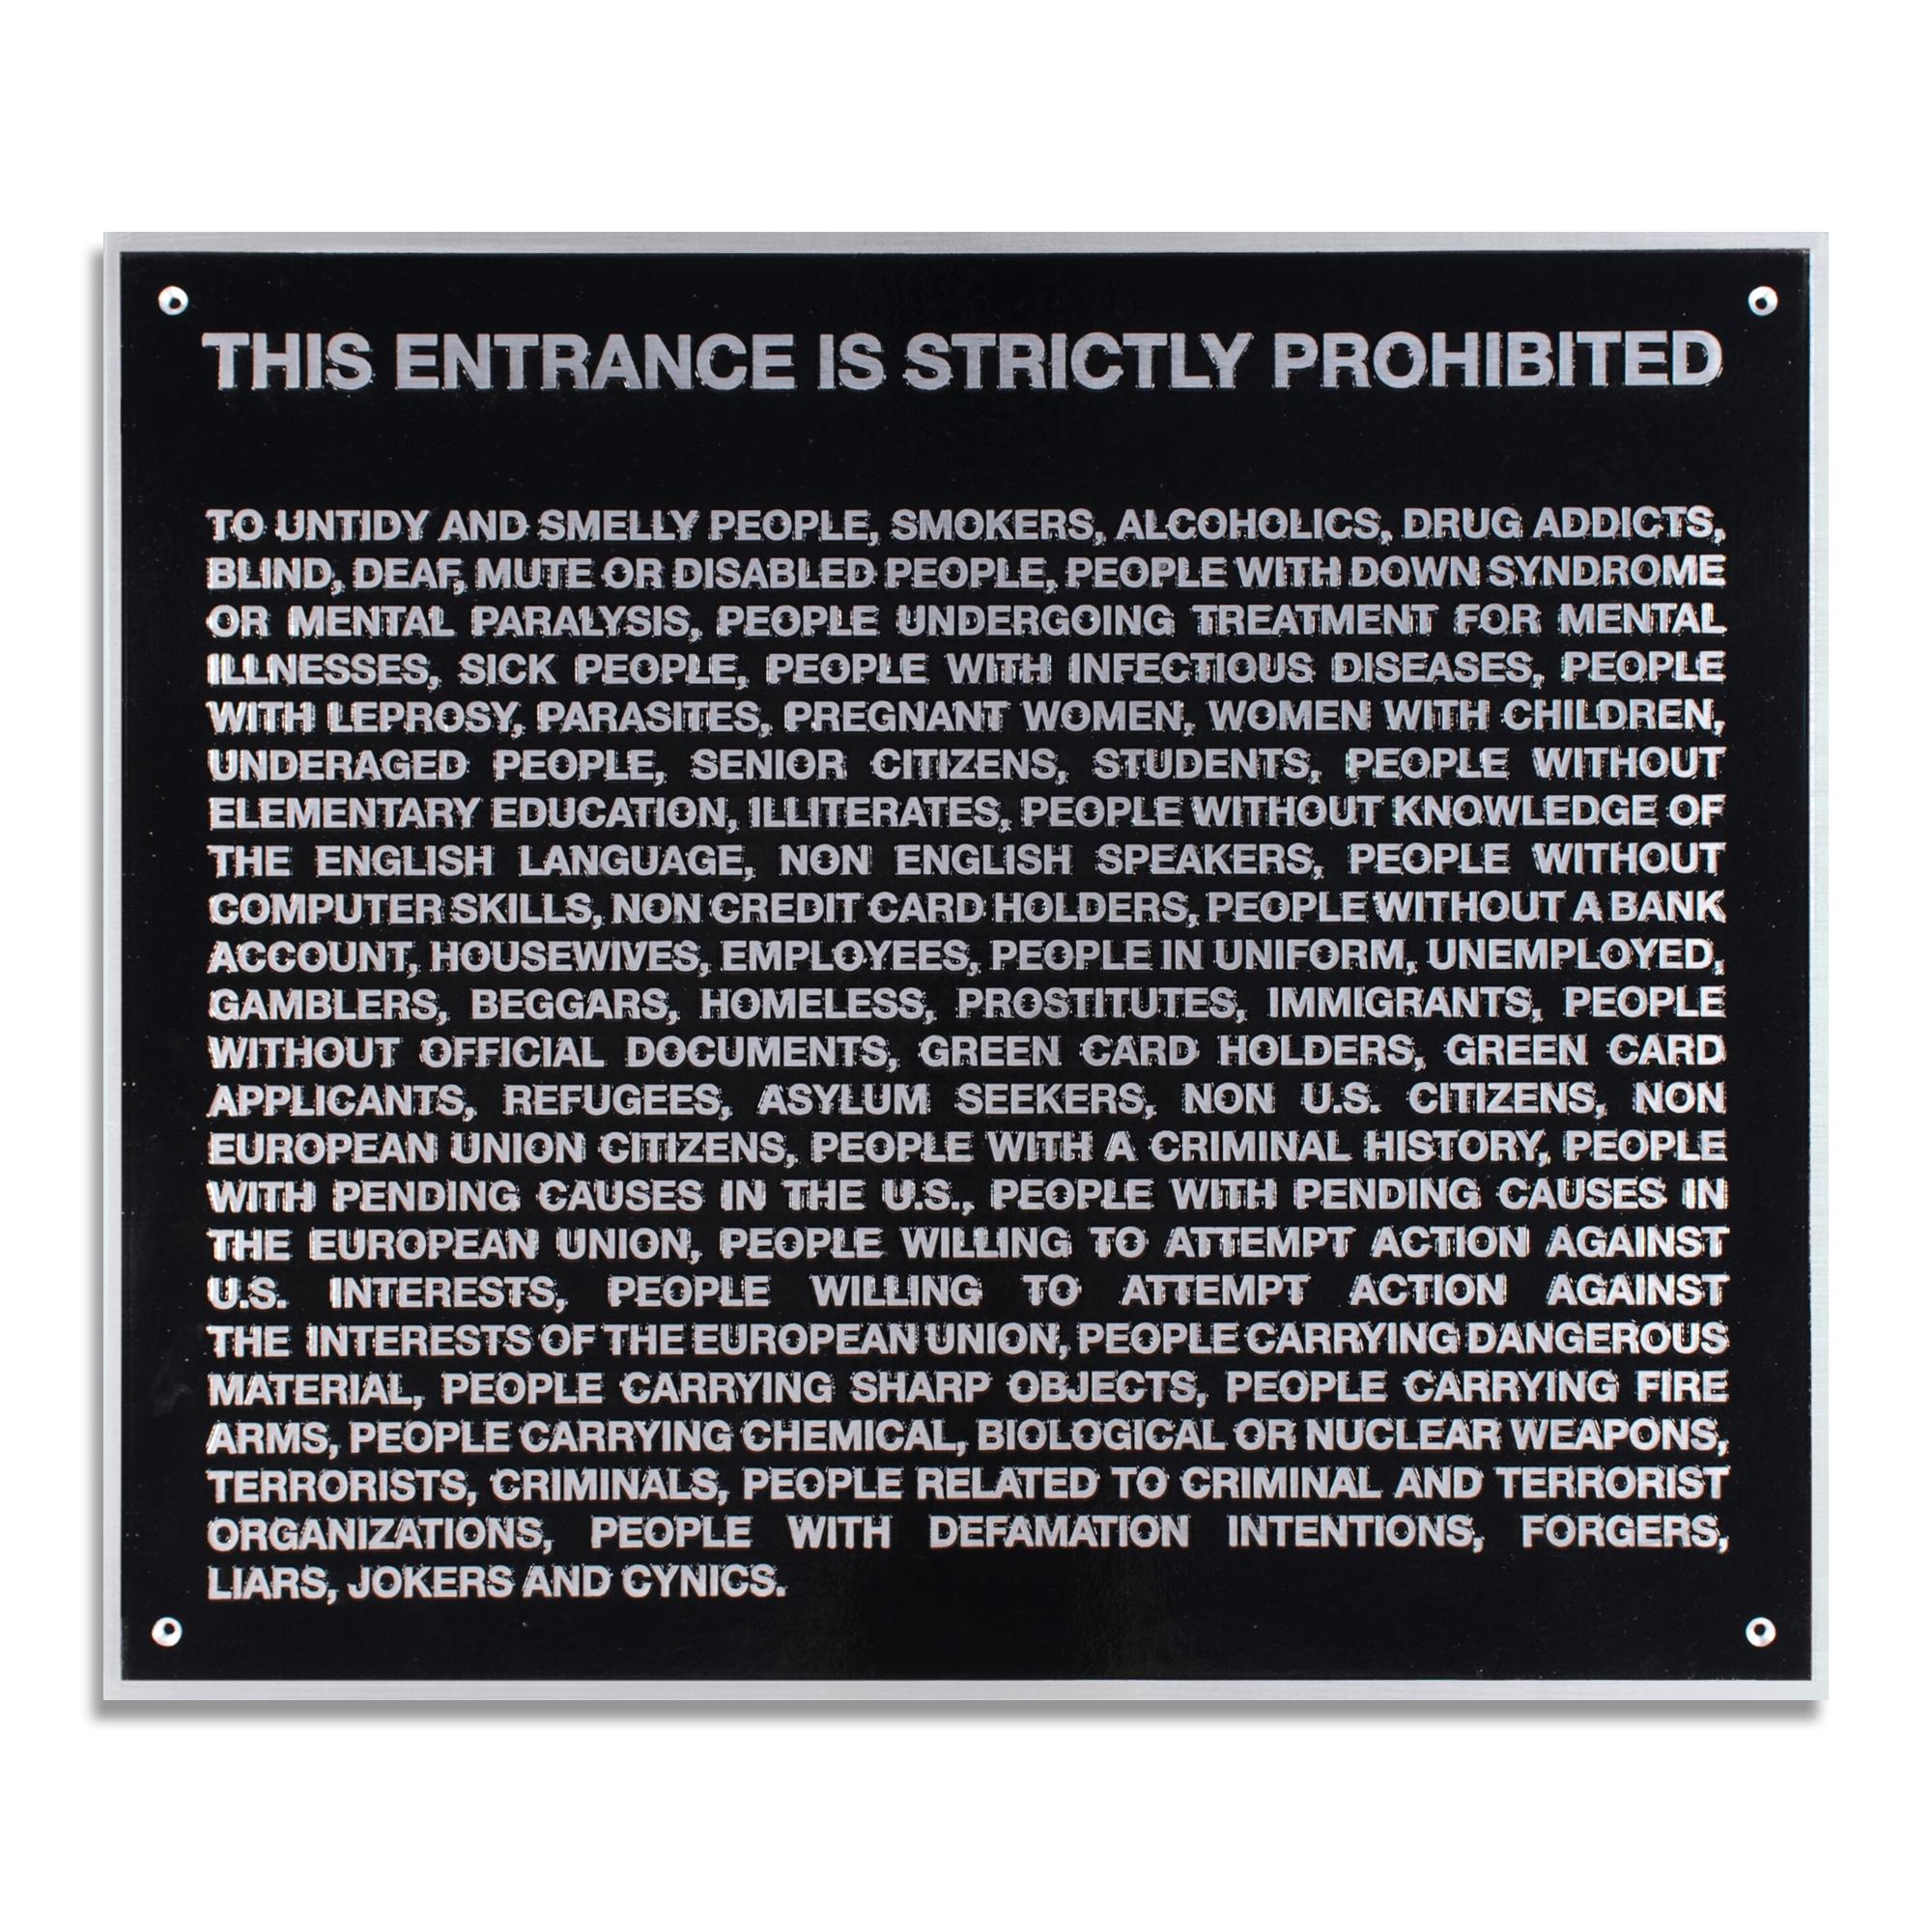 Santiago Sierra (Spanish, b. 1966)
Door Plate, 2006
Medium: Cast aluminium relief sign with black enamel paint
Dimensions: 59 x 69 x 2 cm
Edition of 15: Hand signed and numbered on accompanying label on the reverse
Condition: Excellent